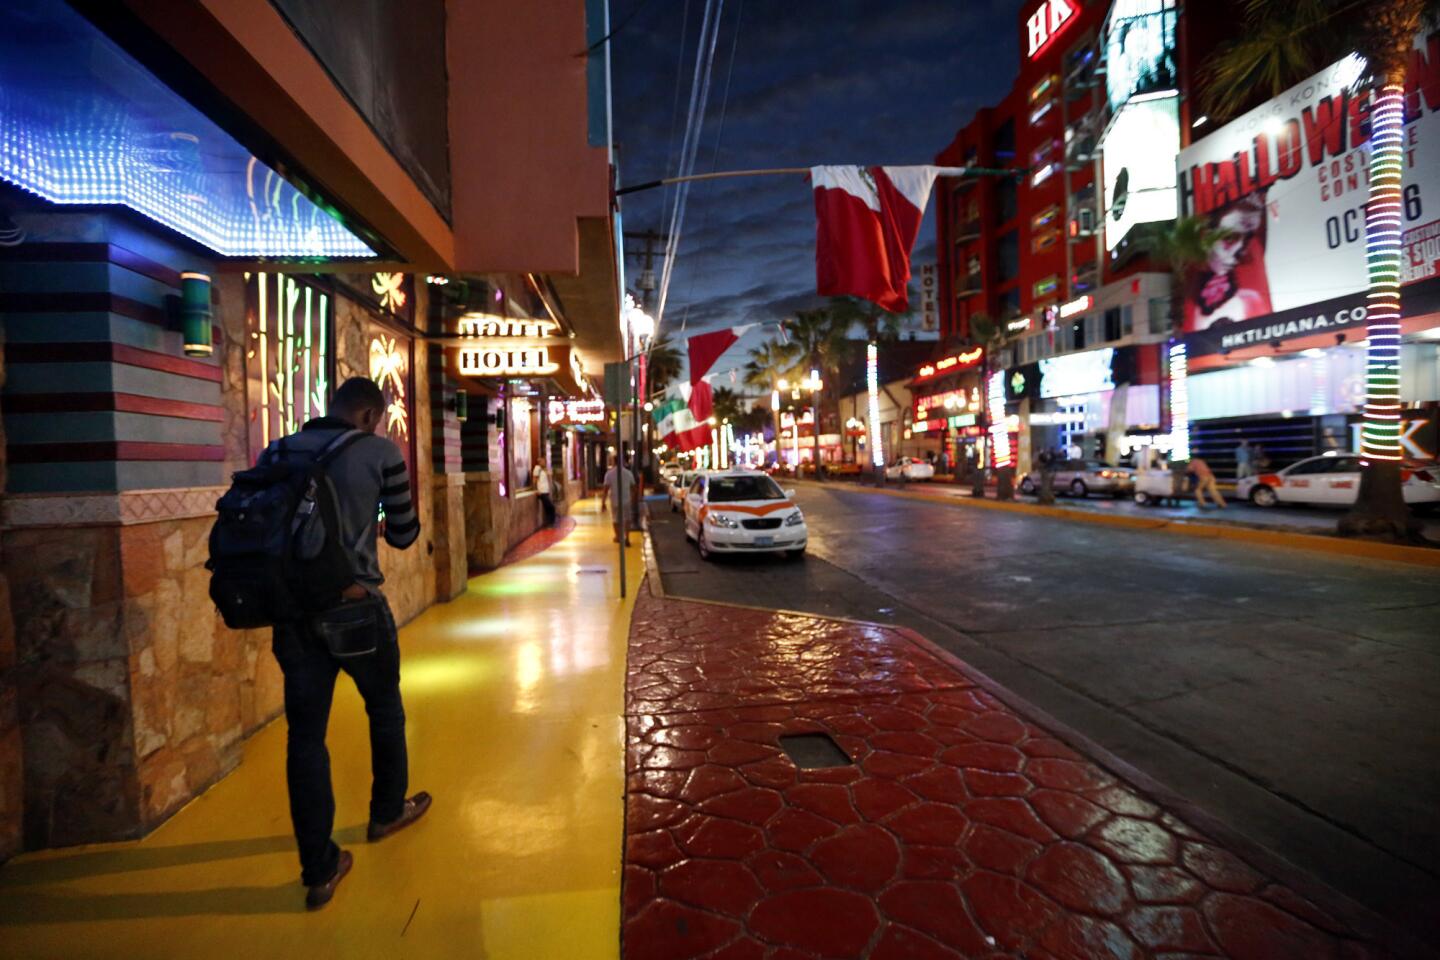 Nertho Thermitus, a migrant from Haiti, walks through Tijuana’s Red Light District in the early morning on his way to the U.S. border.